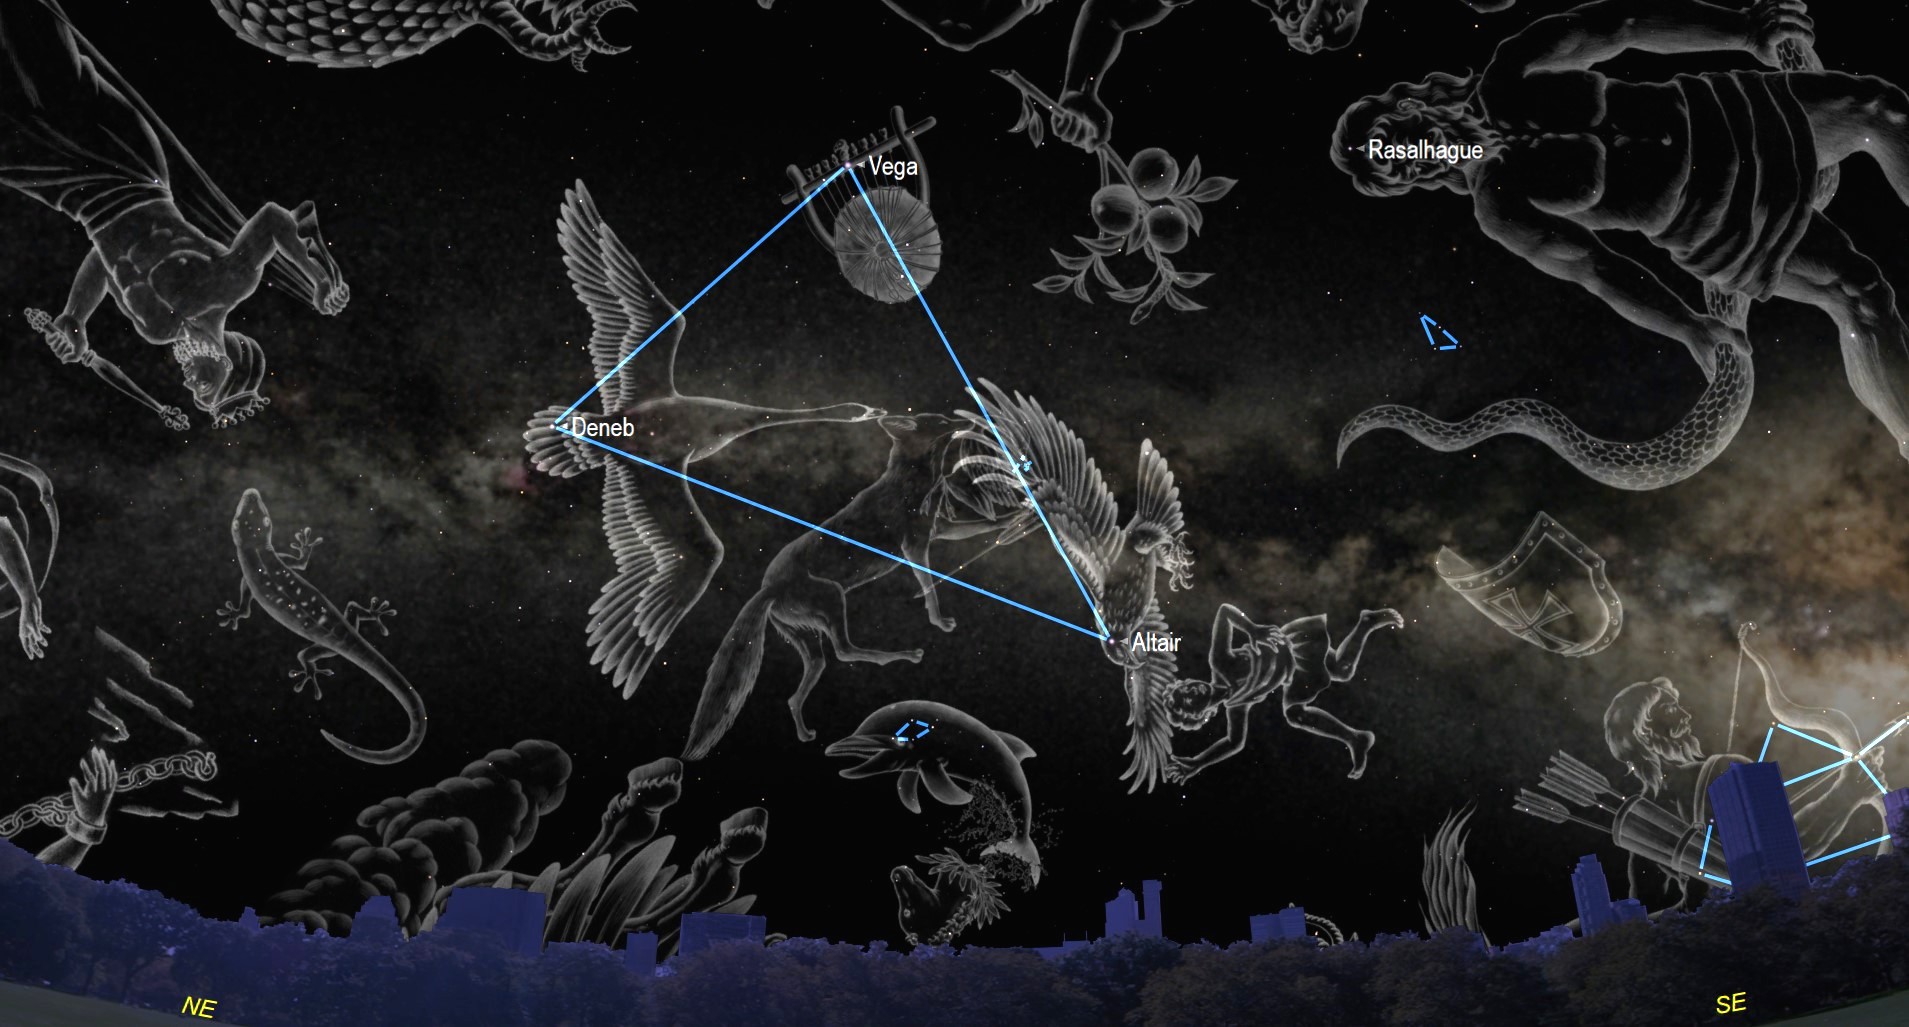 Graphic from Starry Night showing the Summer Triangle and associated constellations.